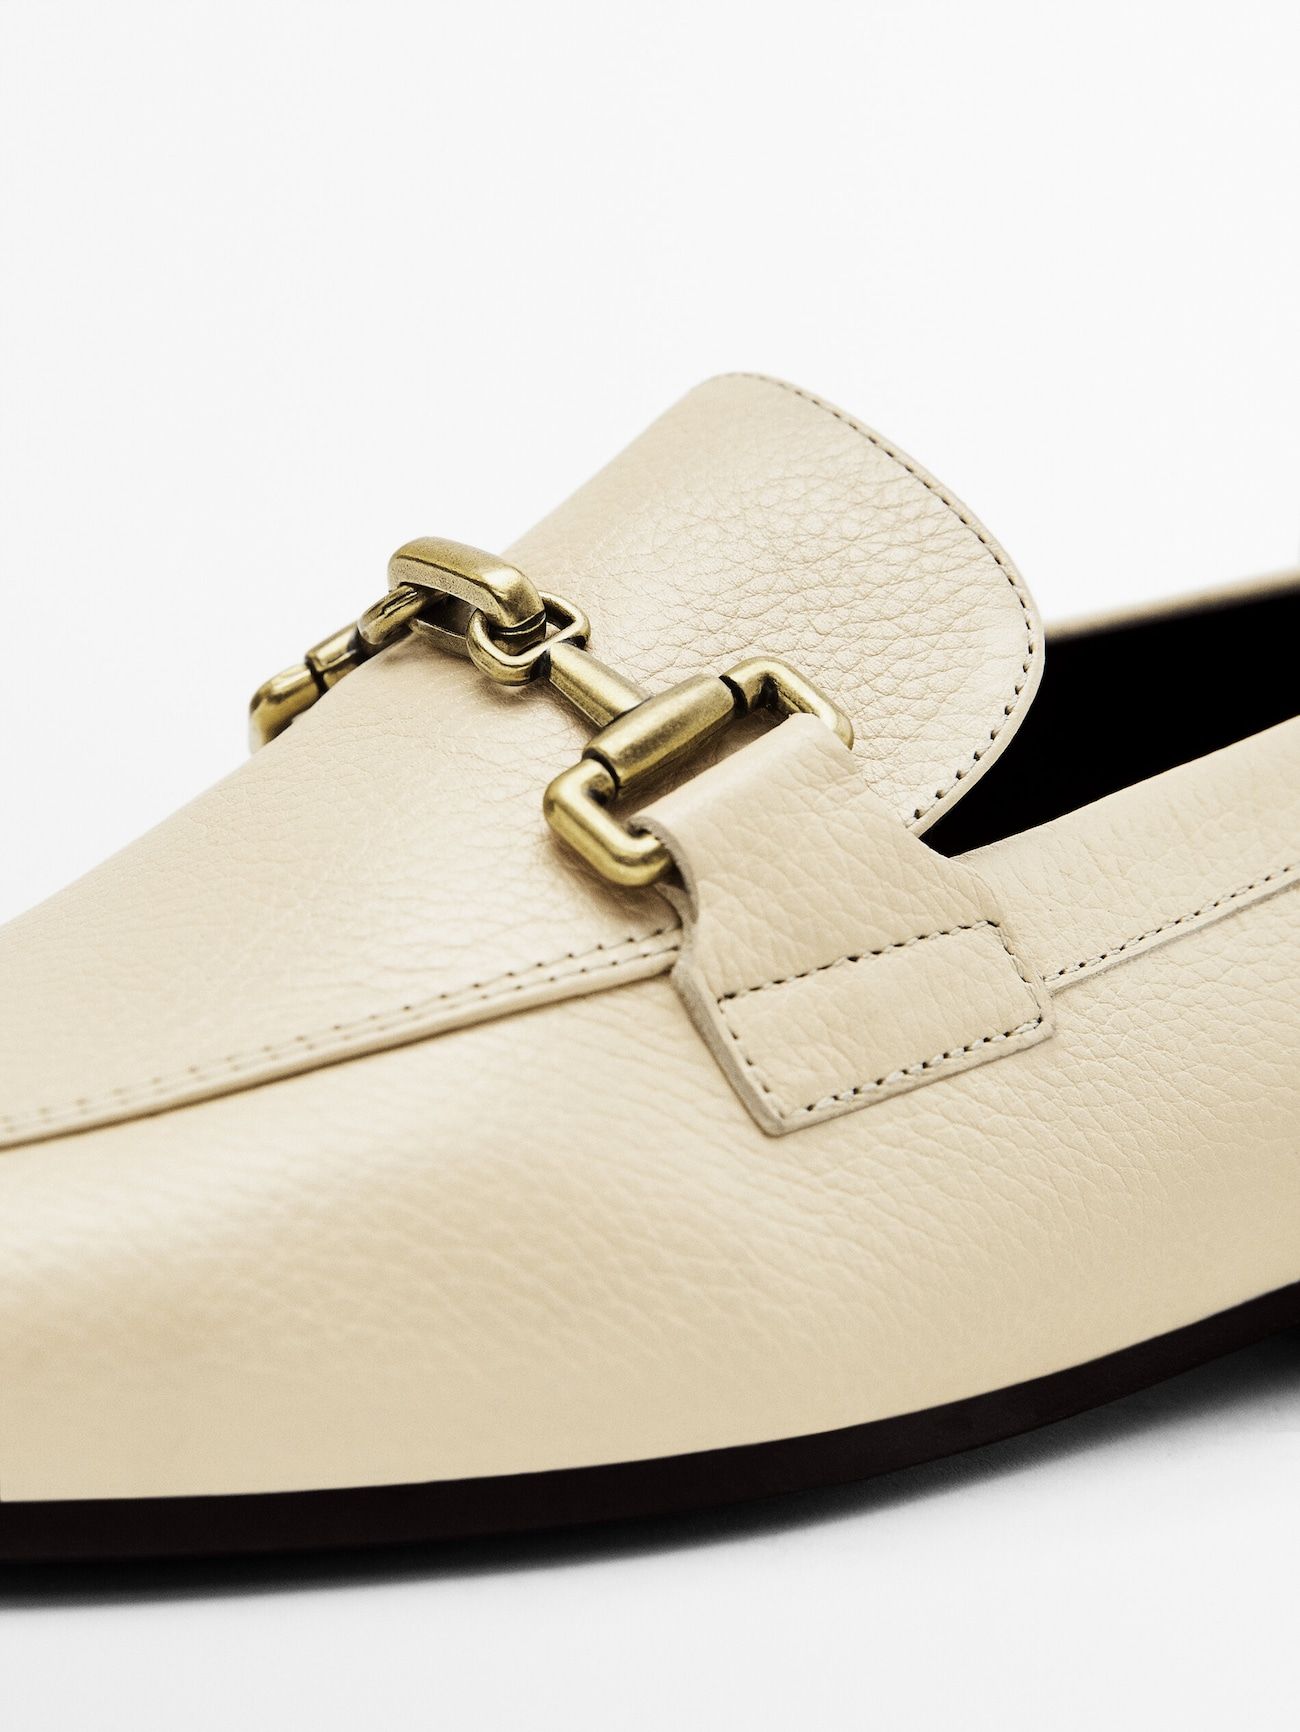 Leather loafers with metal buckle | Massimo Dutti (US)